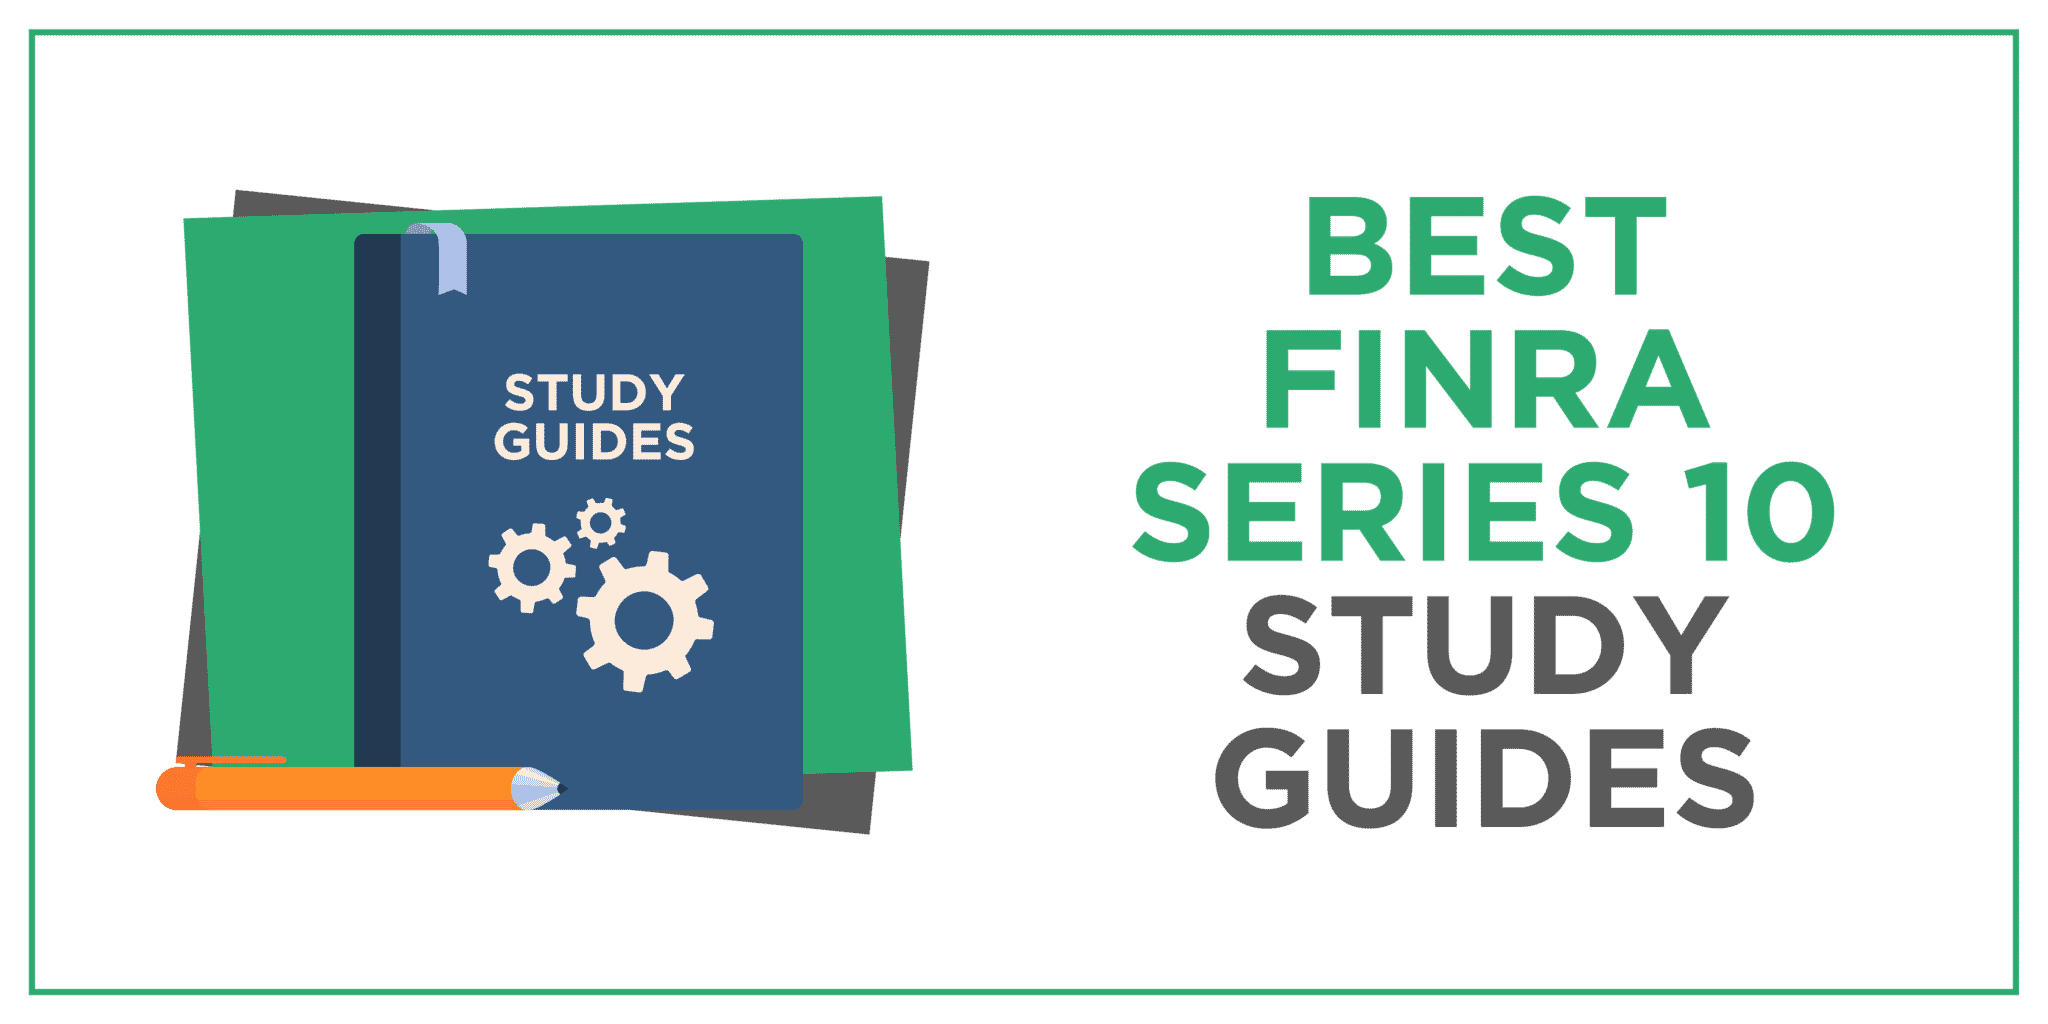 Best FINRA Series 10 Study Guides